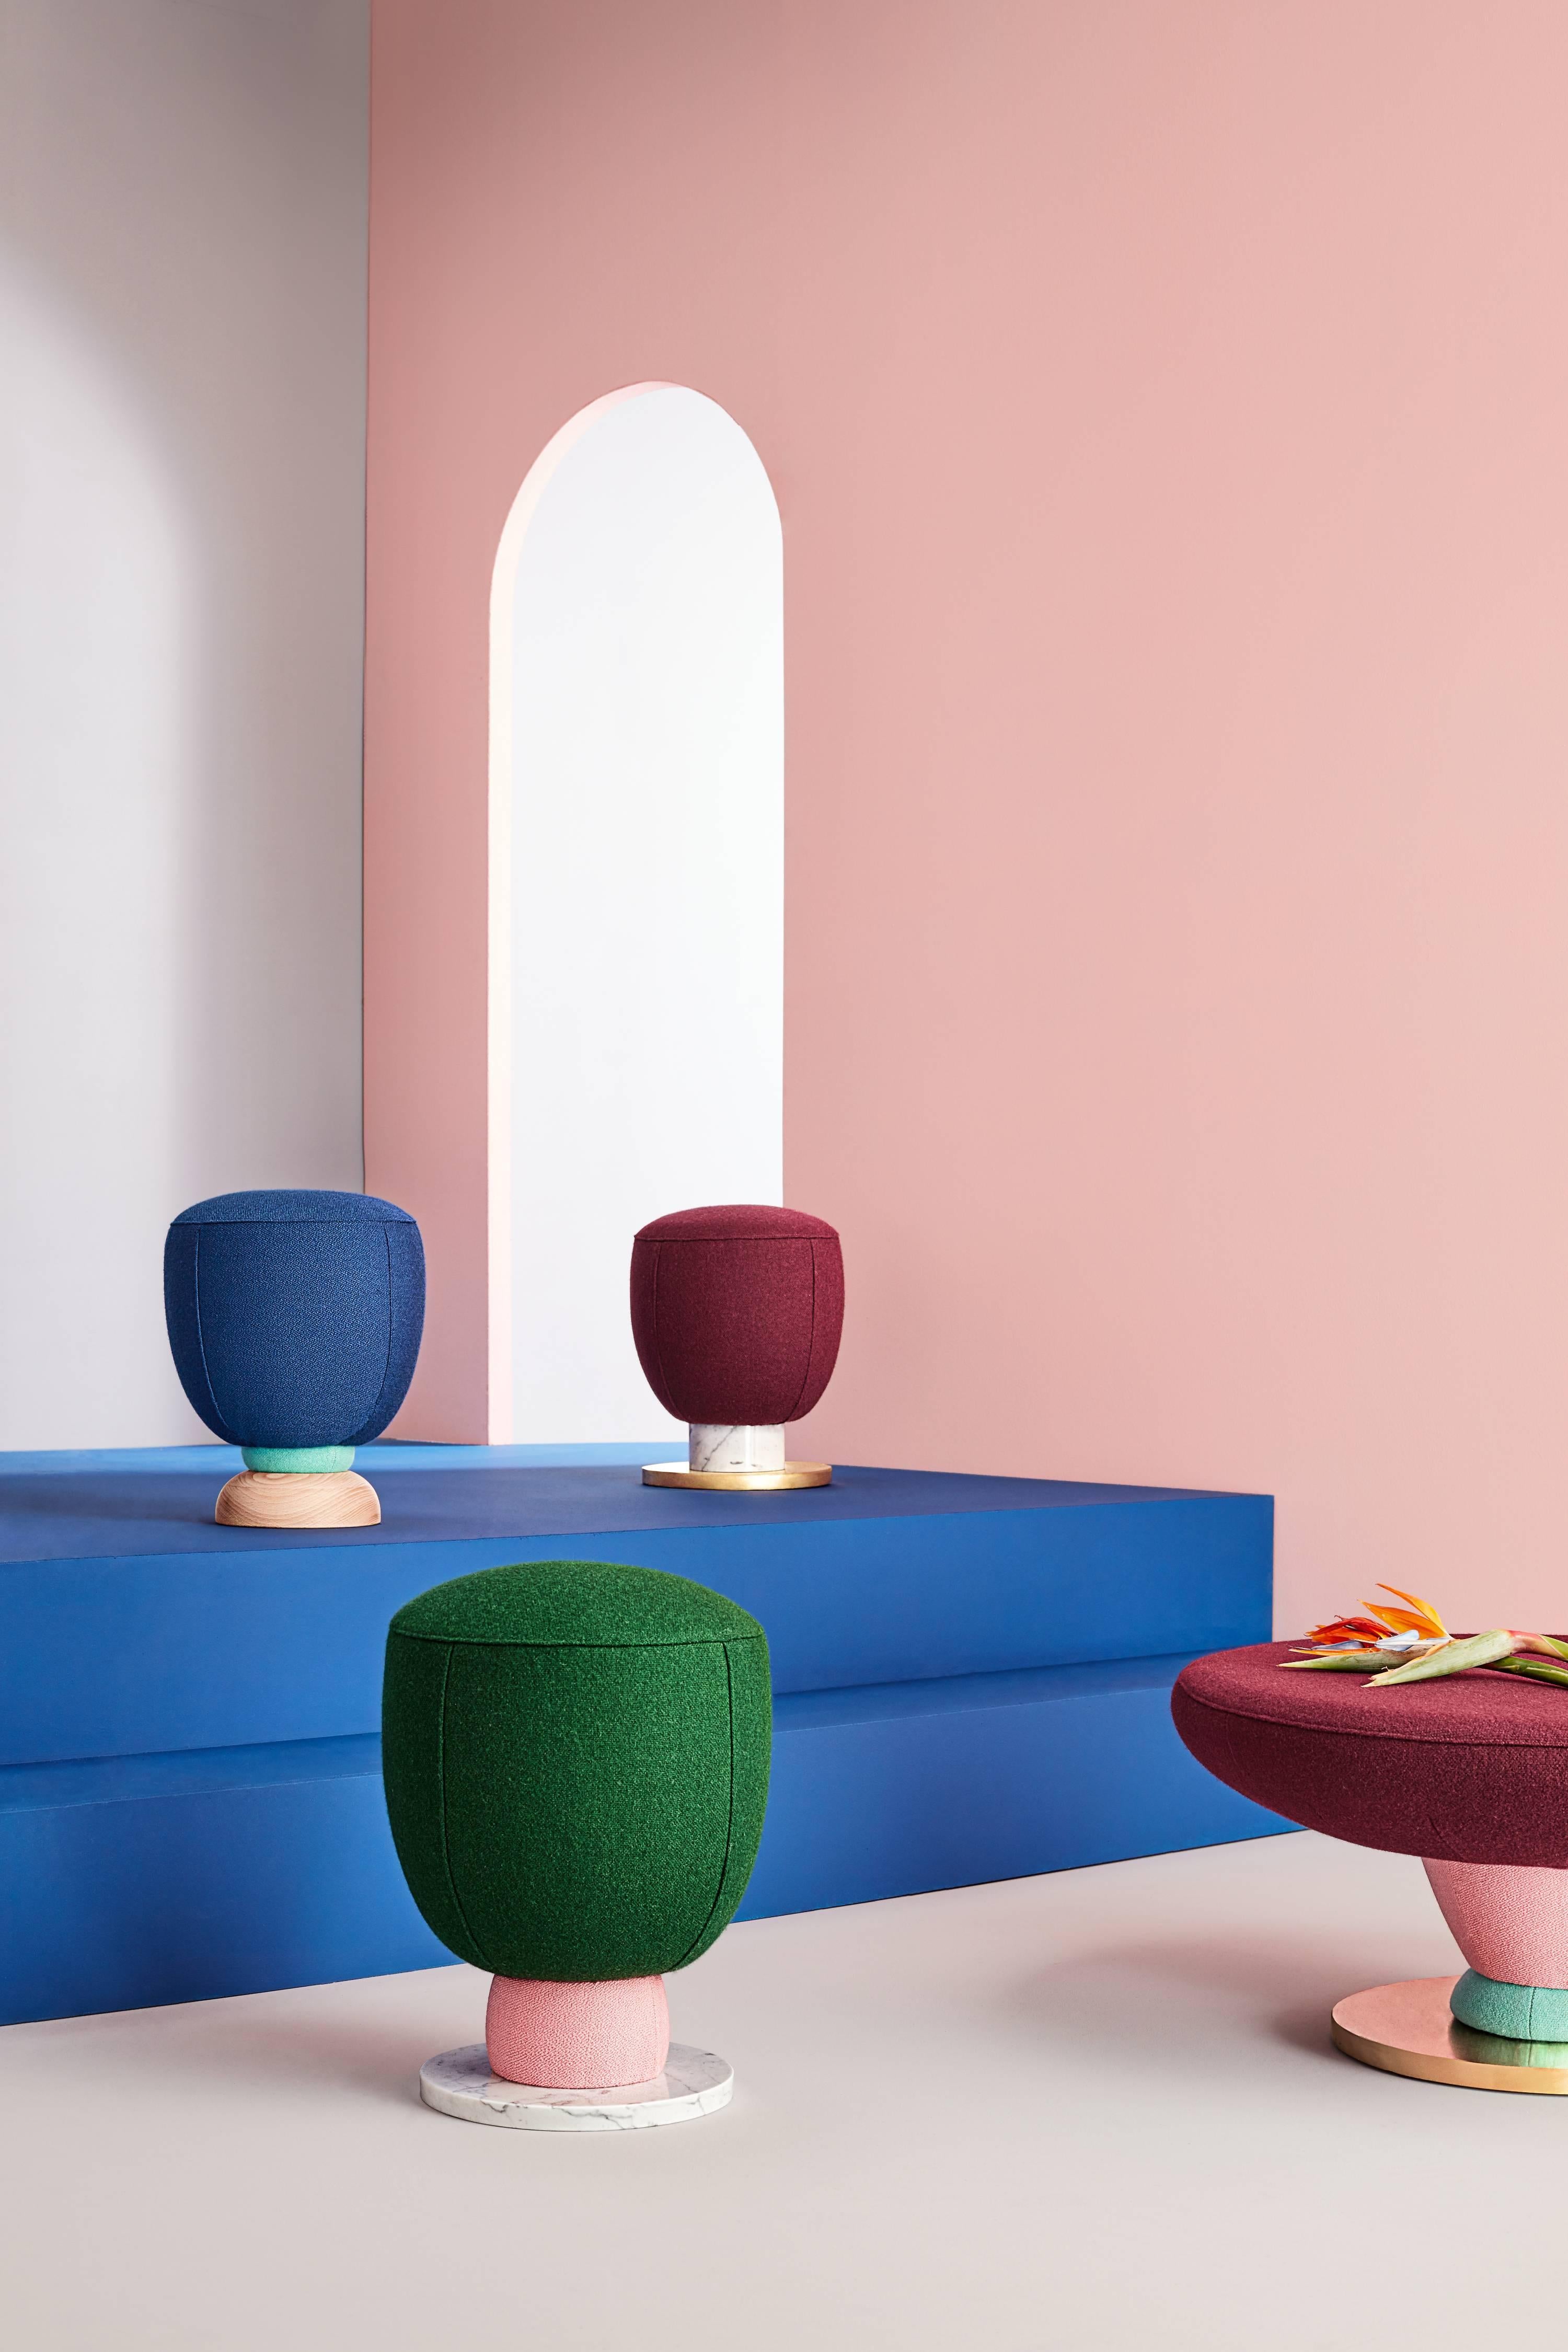 Pair of toadstools collection blue Puff Masquespacio

This collection of puffs, table and sofa bench designed by Masquespacio is inspired in the visual culture and graphic design always present one way
or another in the creative consultancy